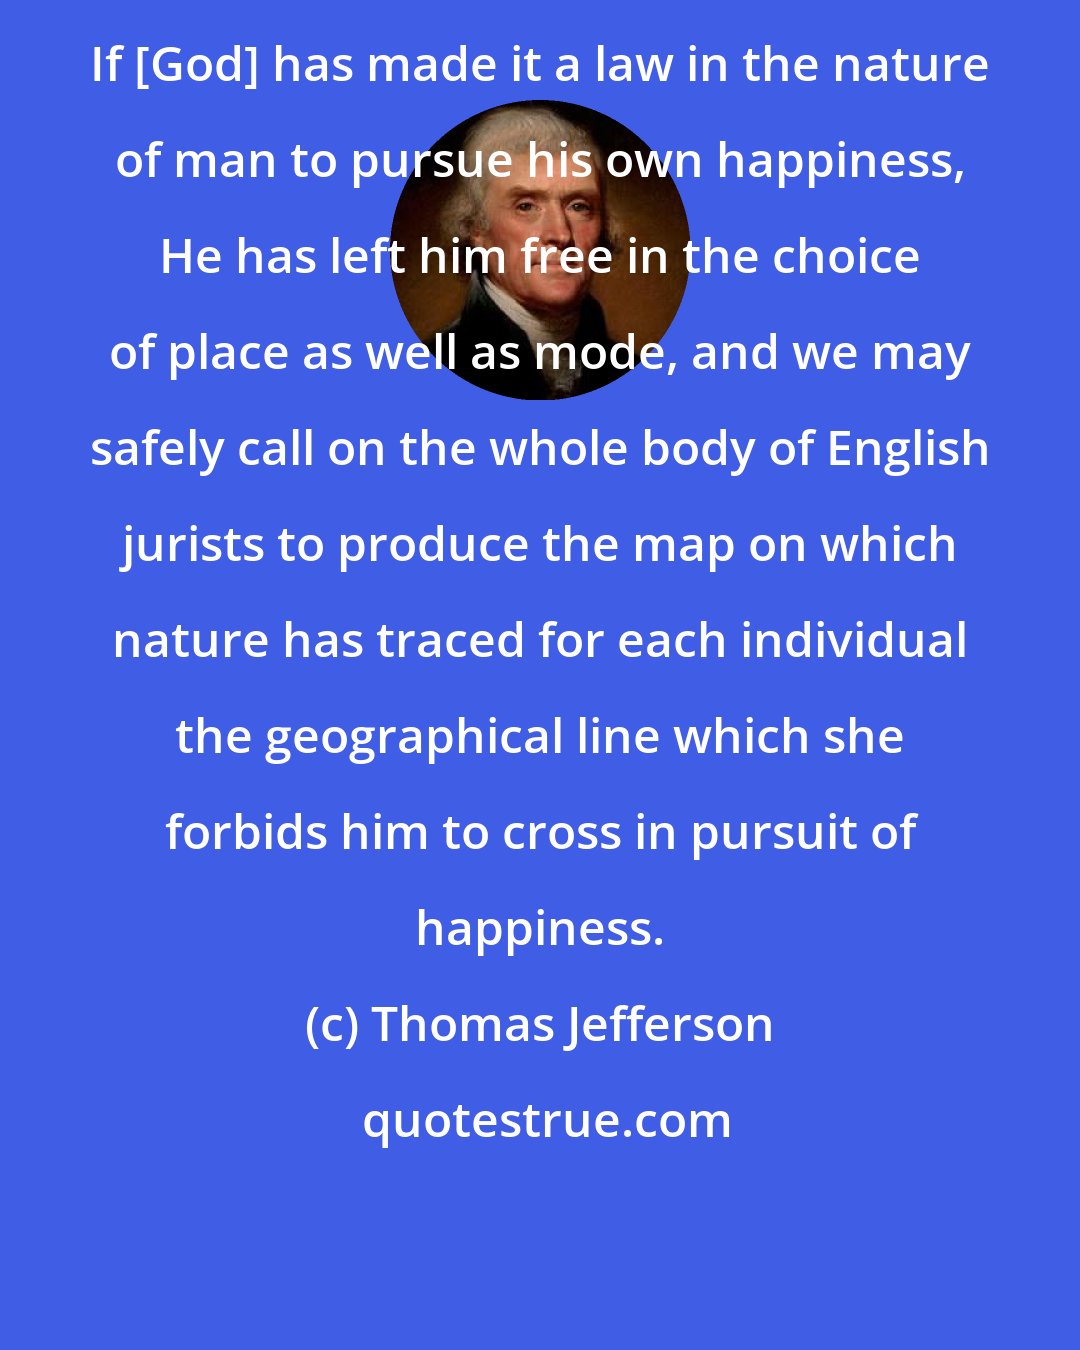 Thomas Jefferson: If [God] has made it a law in the nature of man to pursue his own happiness, He has left him free in the choice of place as well as mode, and we may safely call on the whole body of English jurists to produce the map on which nature has traced for each individual the geographical line which she forbids him to cross in pursuit of happiness.